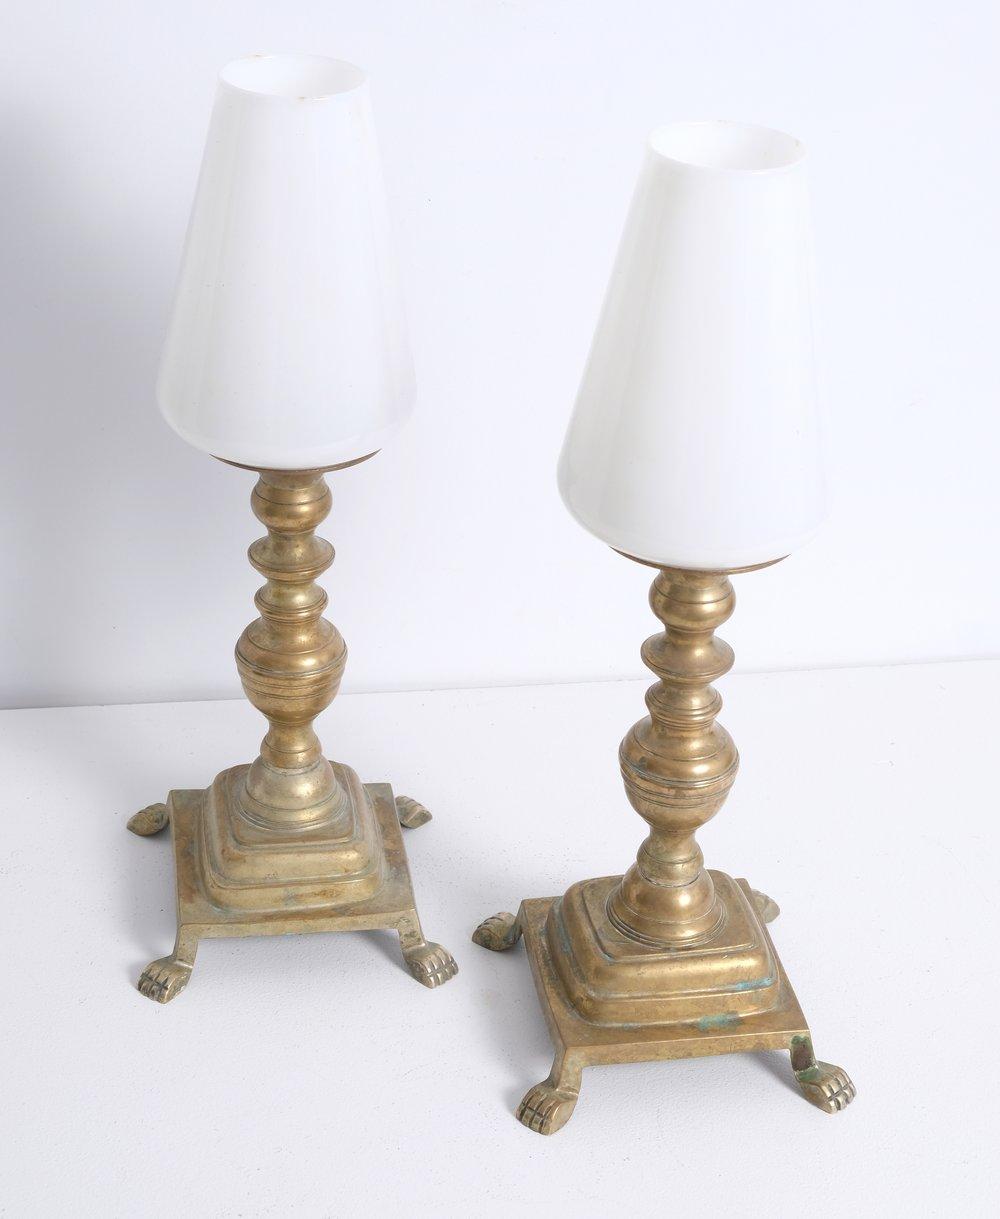 Pair of Claw Footed Antique Brass Storm Lamps. Nicely patinated. Includes glass shades.

